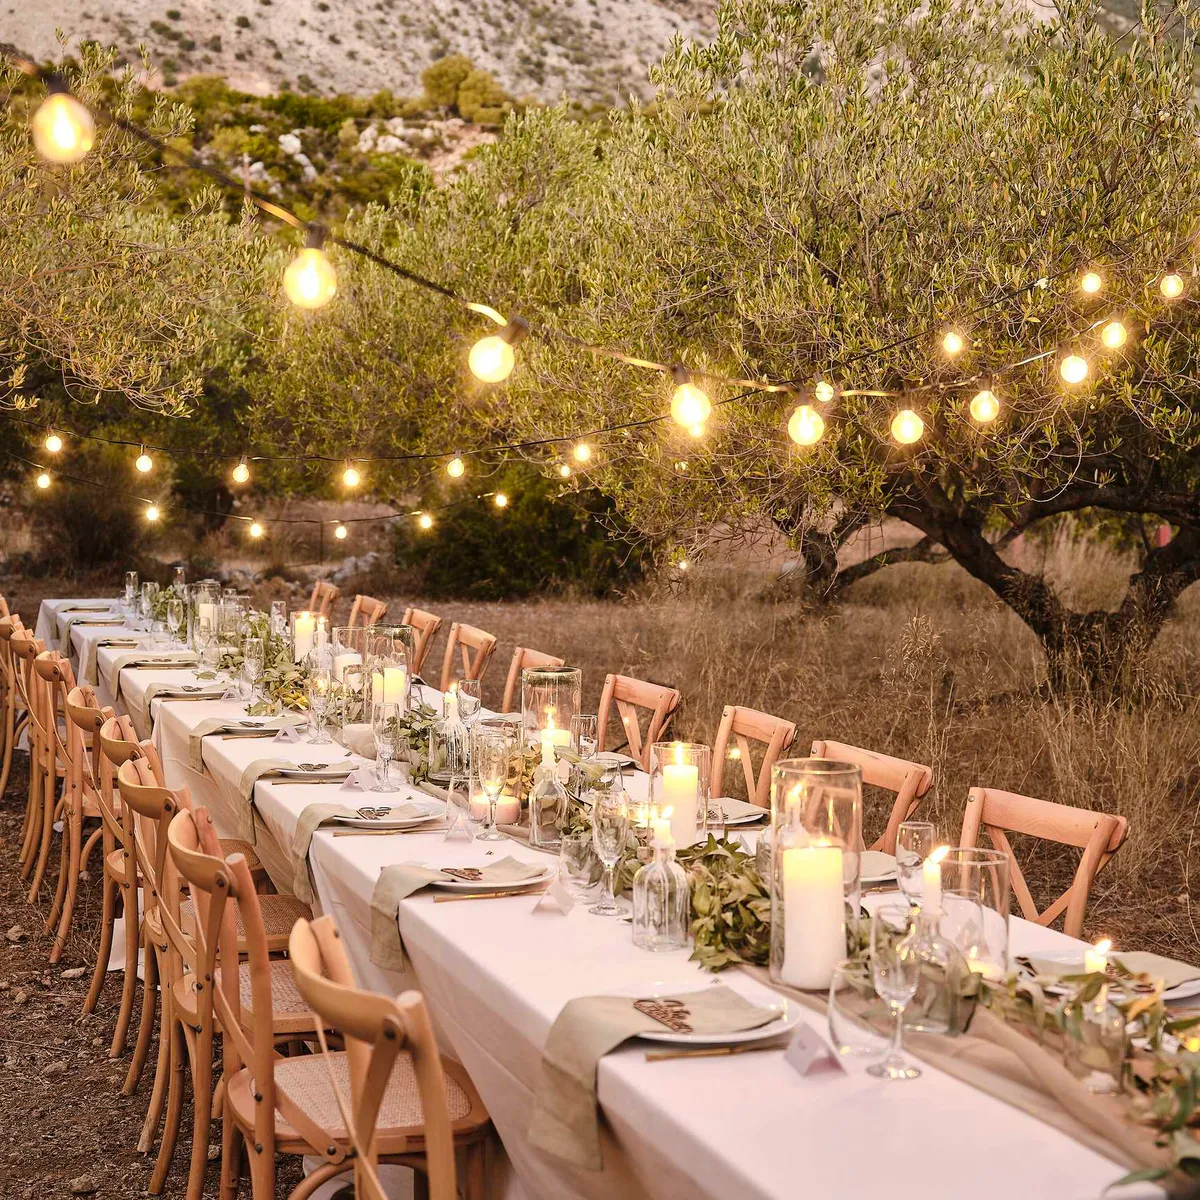 Garden dinner party set up with long dining table and festoon lights and candles